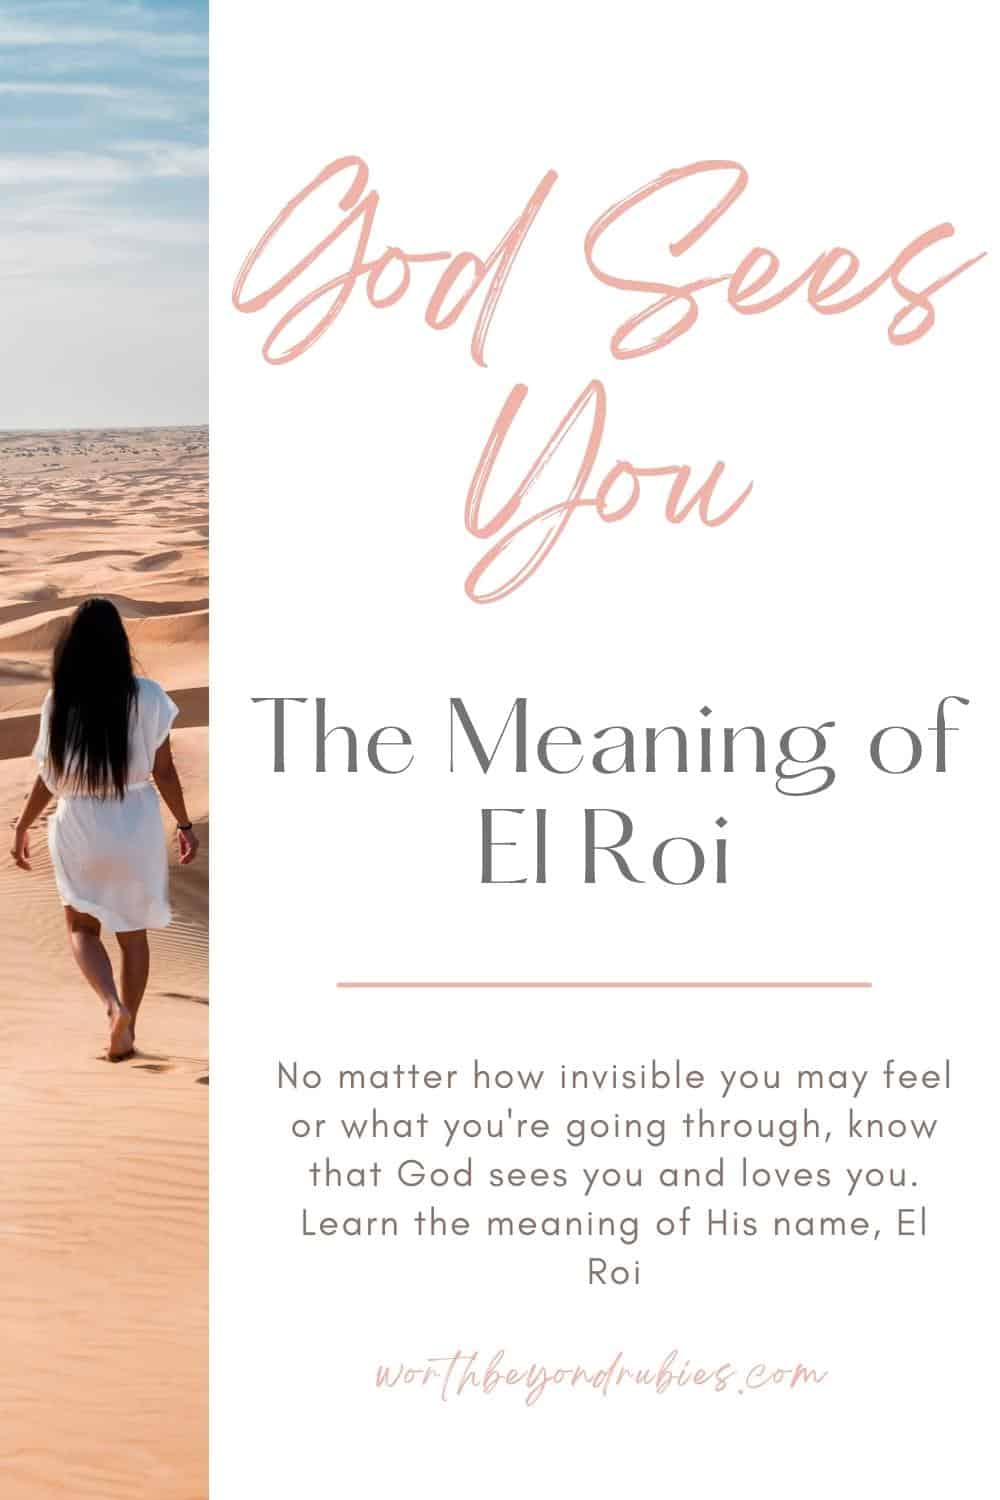 Woman walking in desert and text that says God Sees You - The Meaning of El Roi: No matter how invisible you may feel or what you're going through, know that God sees you and loves you. Learn the meaning of His name, El Roi